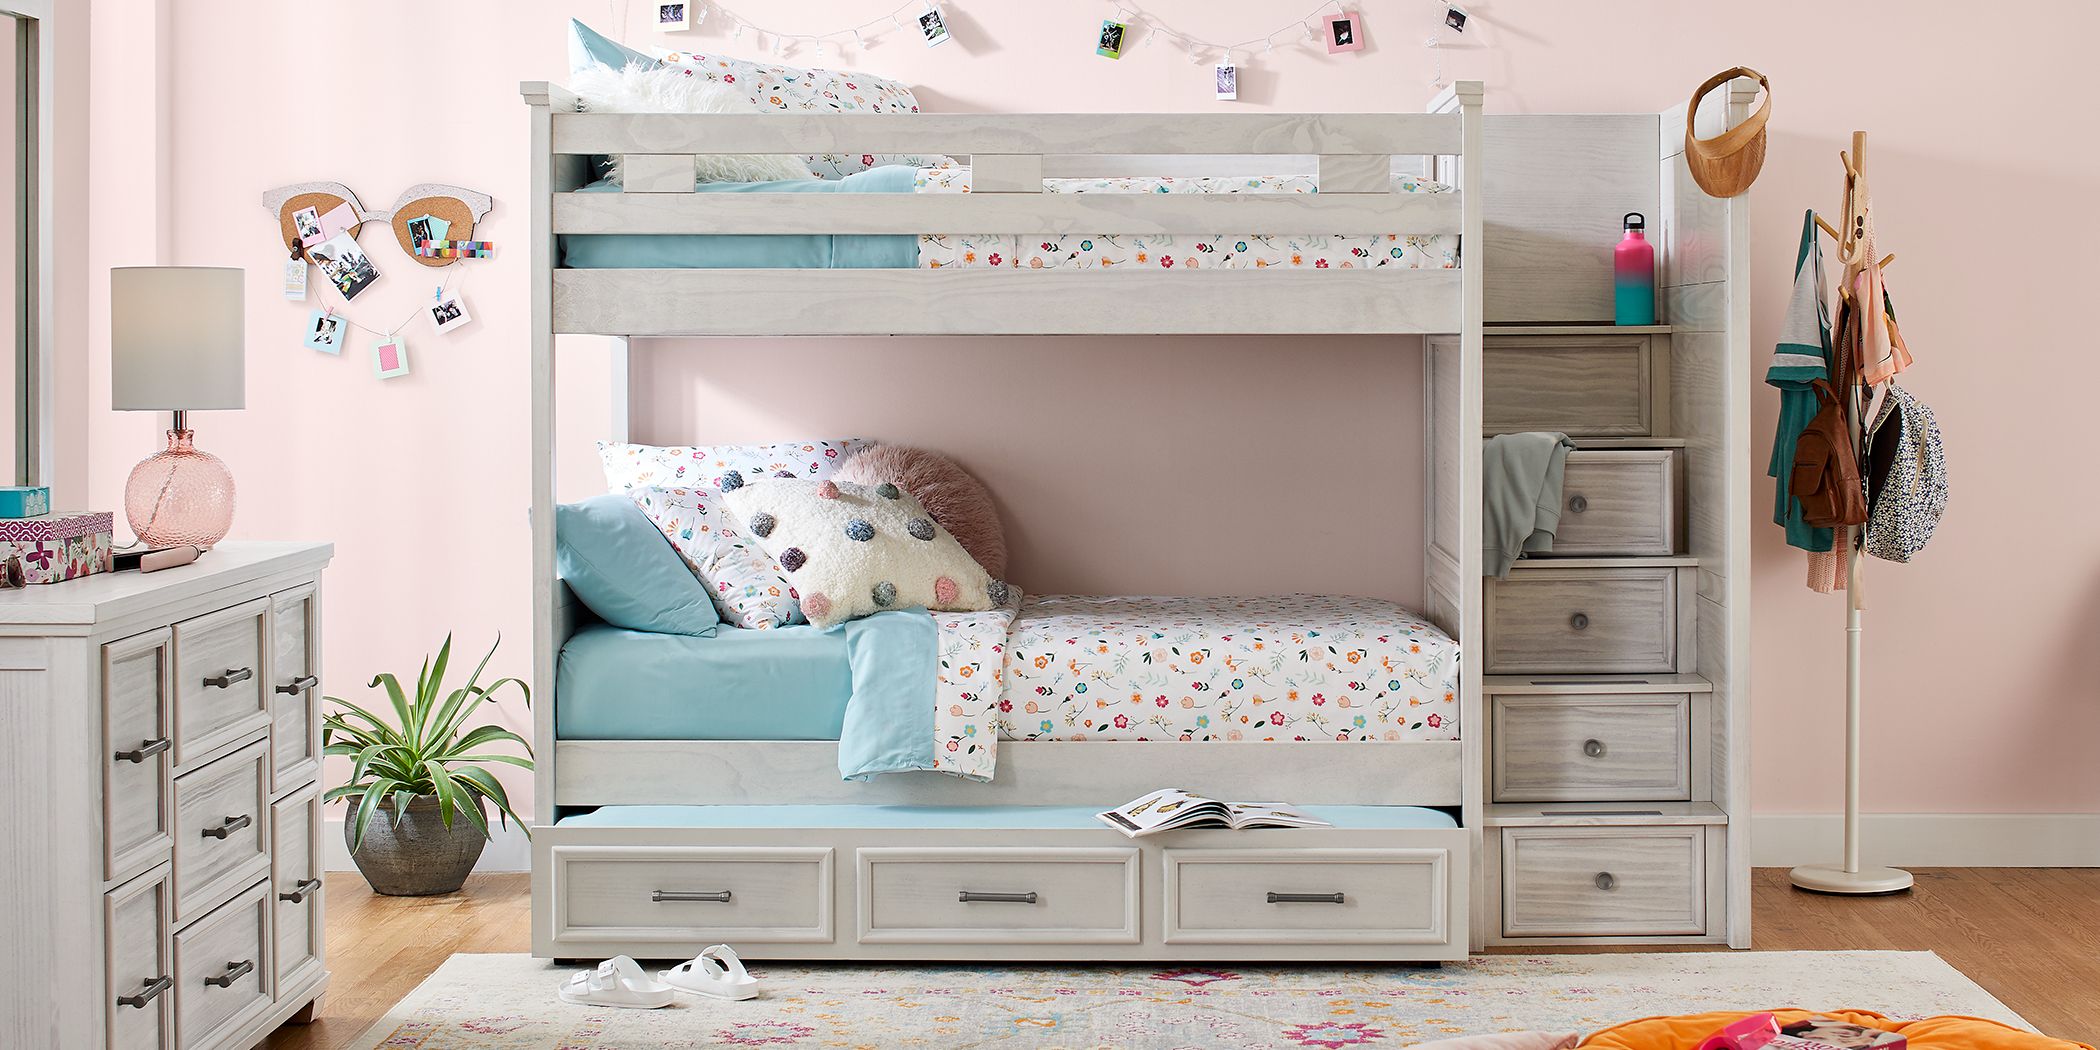 Bunk Beds With Storage Space, Kids Bunk Beds With Drawers